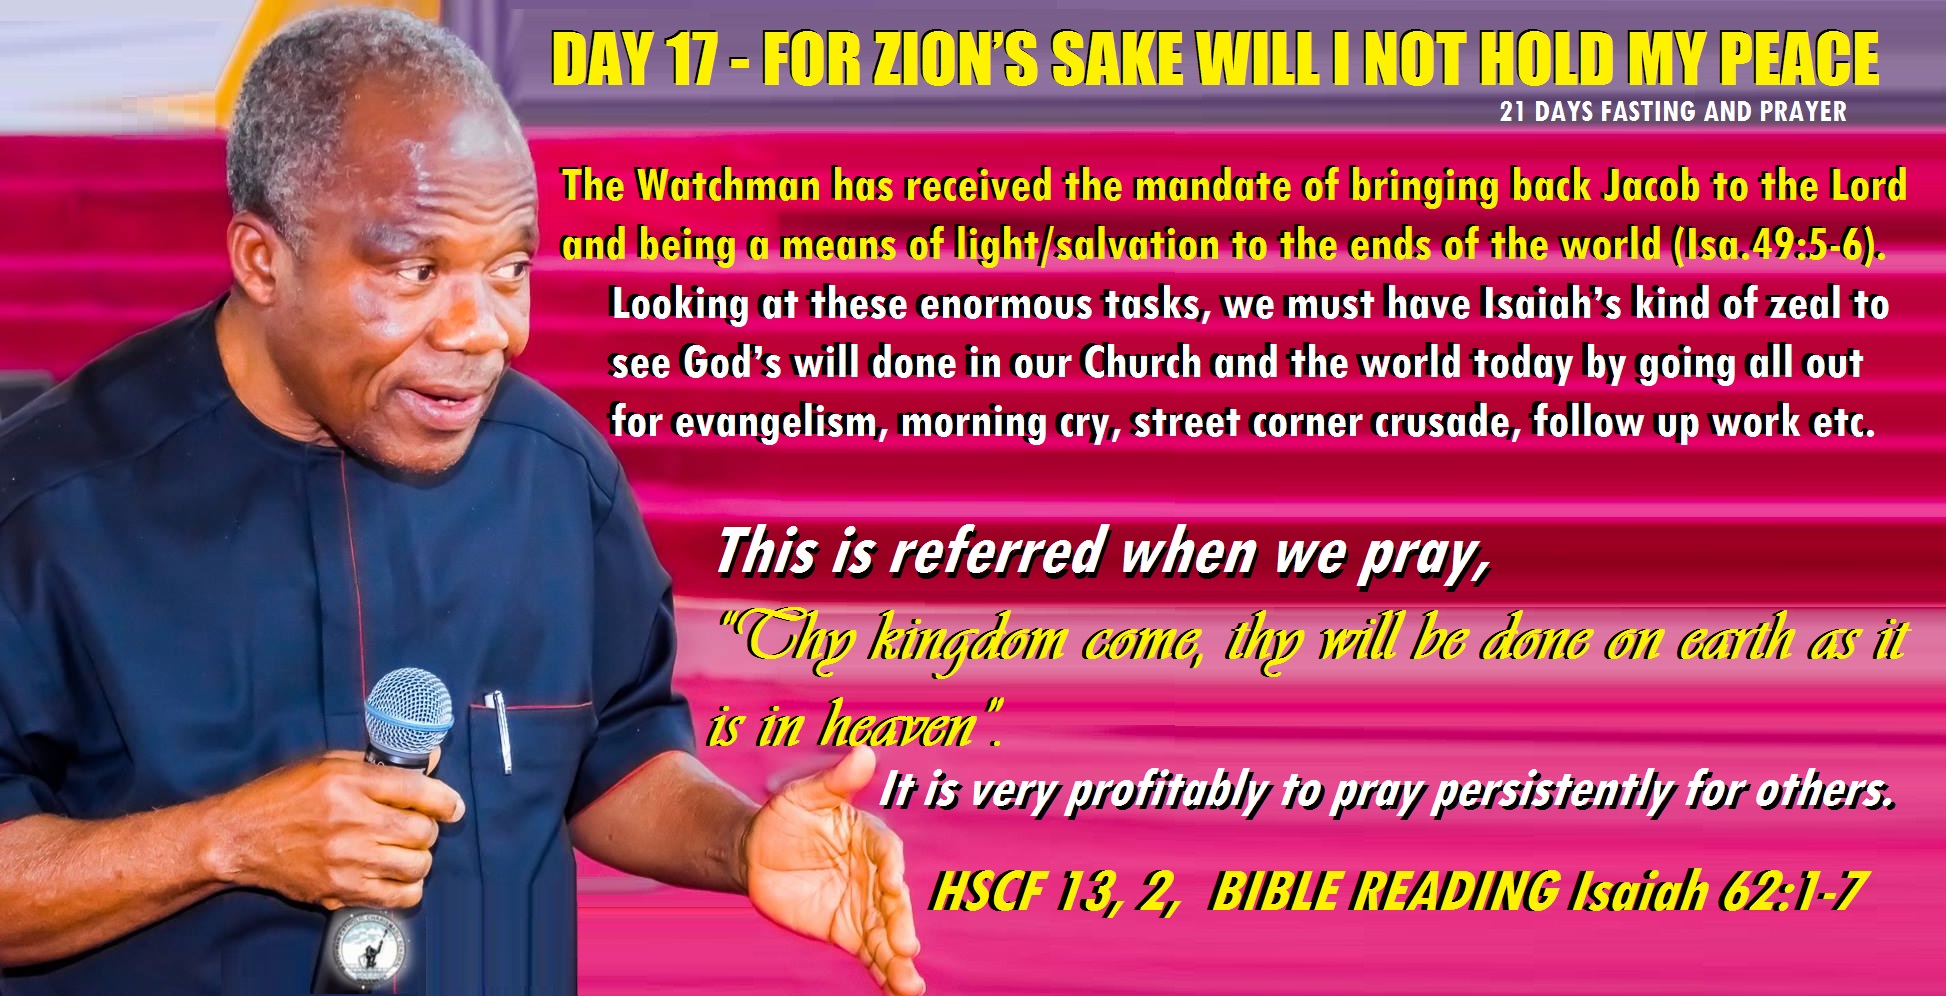 DAY 17 – FOR ZION’S SAKE WILL I NOT HOLD MY PEACE